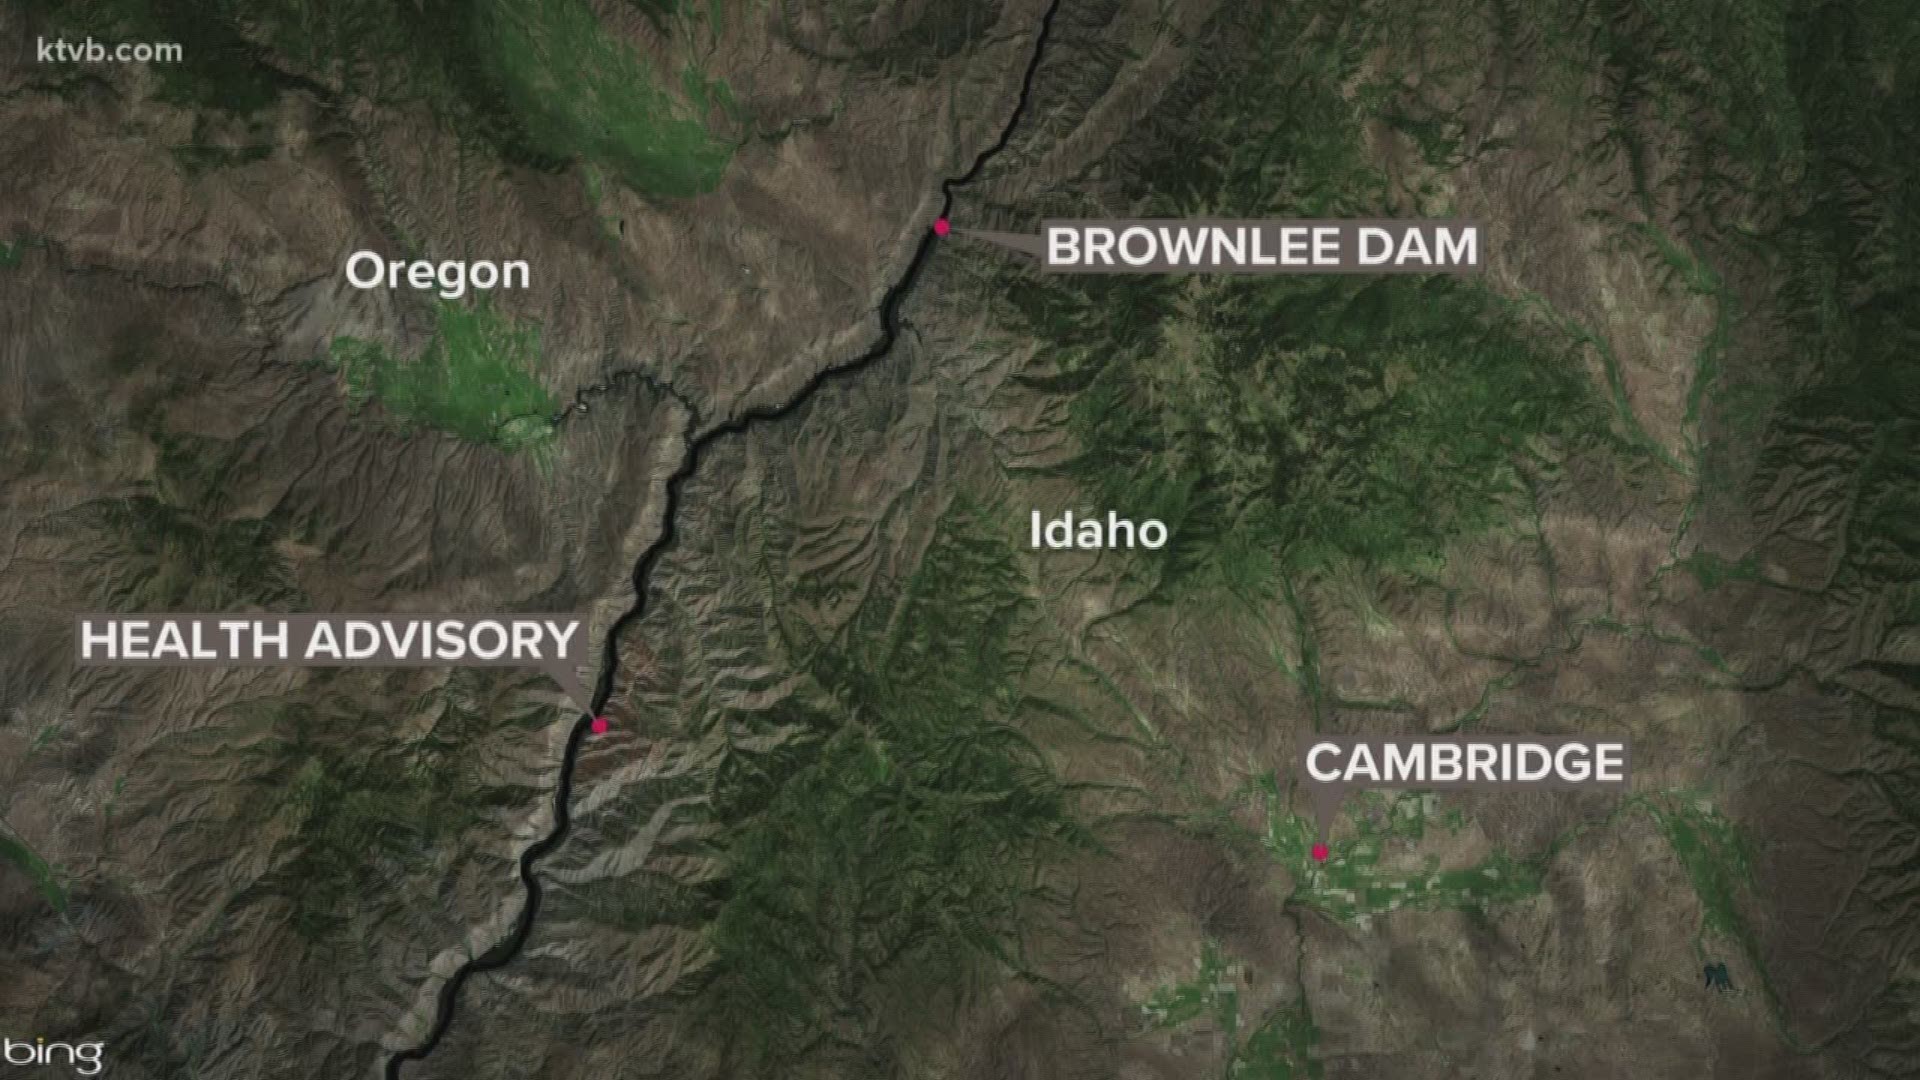 The Southwest District Health Department, along with Idaho Power and the Idaho Department of Environmental Quality, issued a health advisory on Tuesday for the area of the reservoir near Mountain Man Resort including from Wolf Creek on the Idaho side to Canyon Creek on the Oregon side.